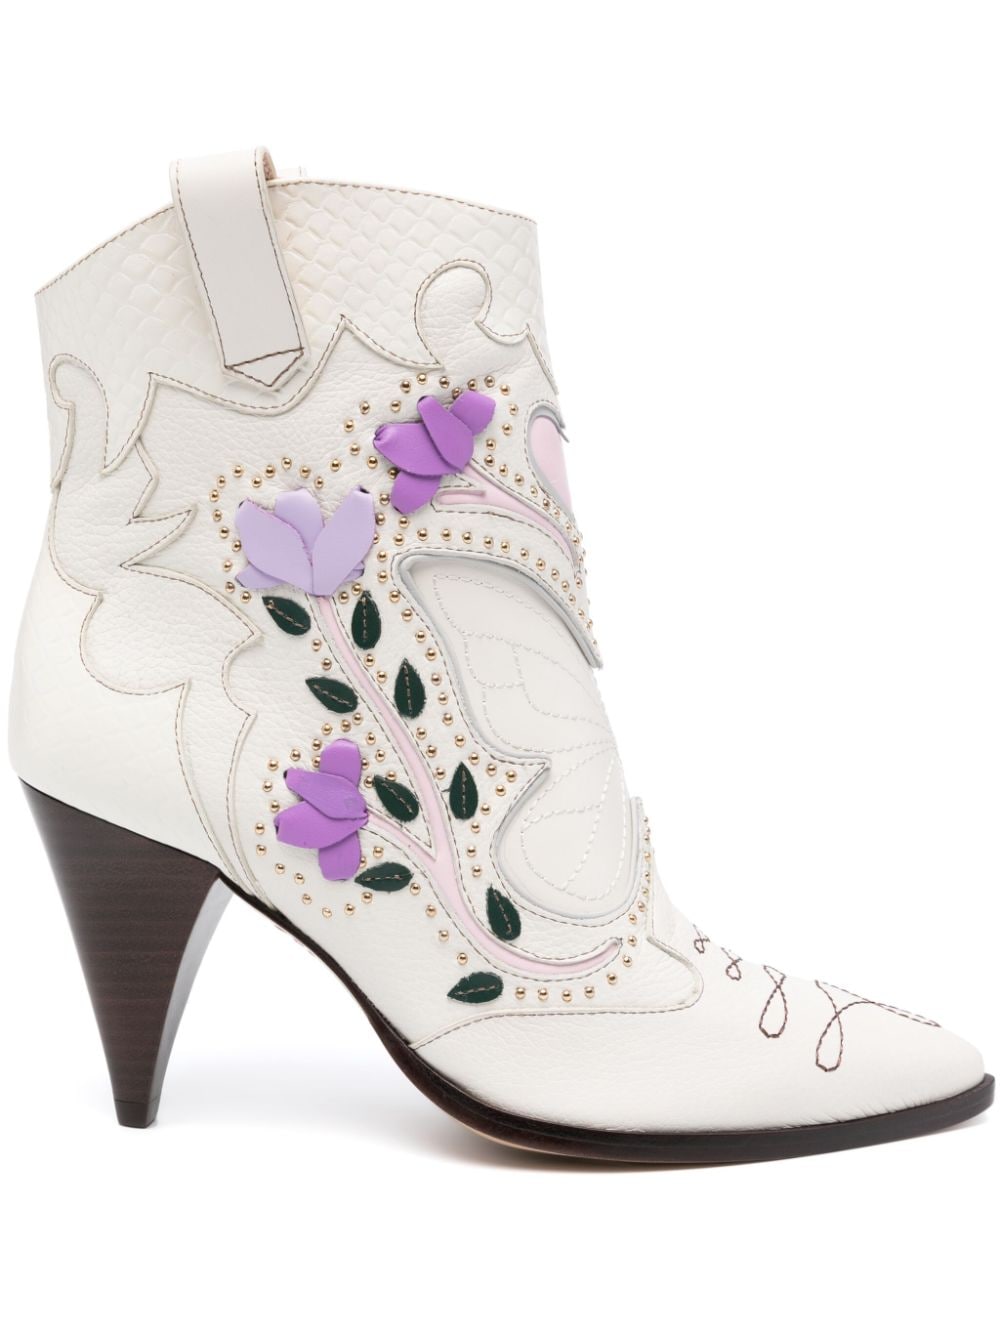 Sophia Webster Shelby 85mm cowboy boots White